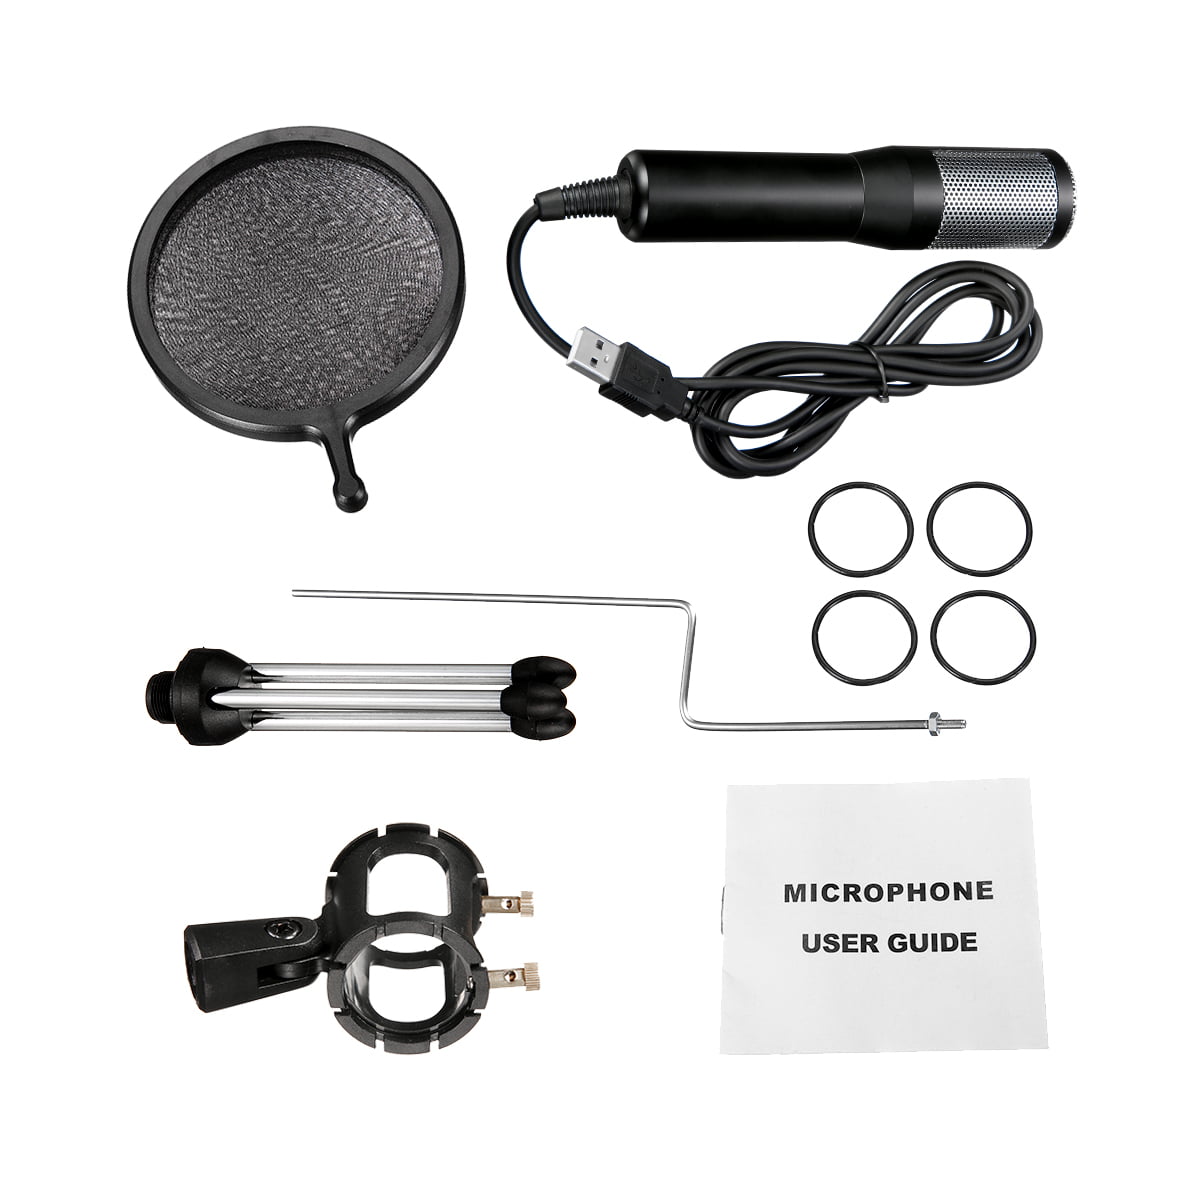 Professional USB Condenser Microphone NASUM Metal USB Condenser Recording Microphone Plug and Play Computer Microphone for Podcasting Field Recordings Interviews Voiceovers Conference Calls 